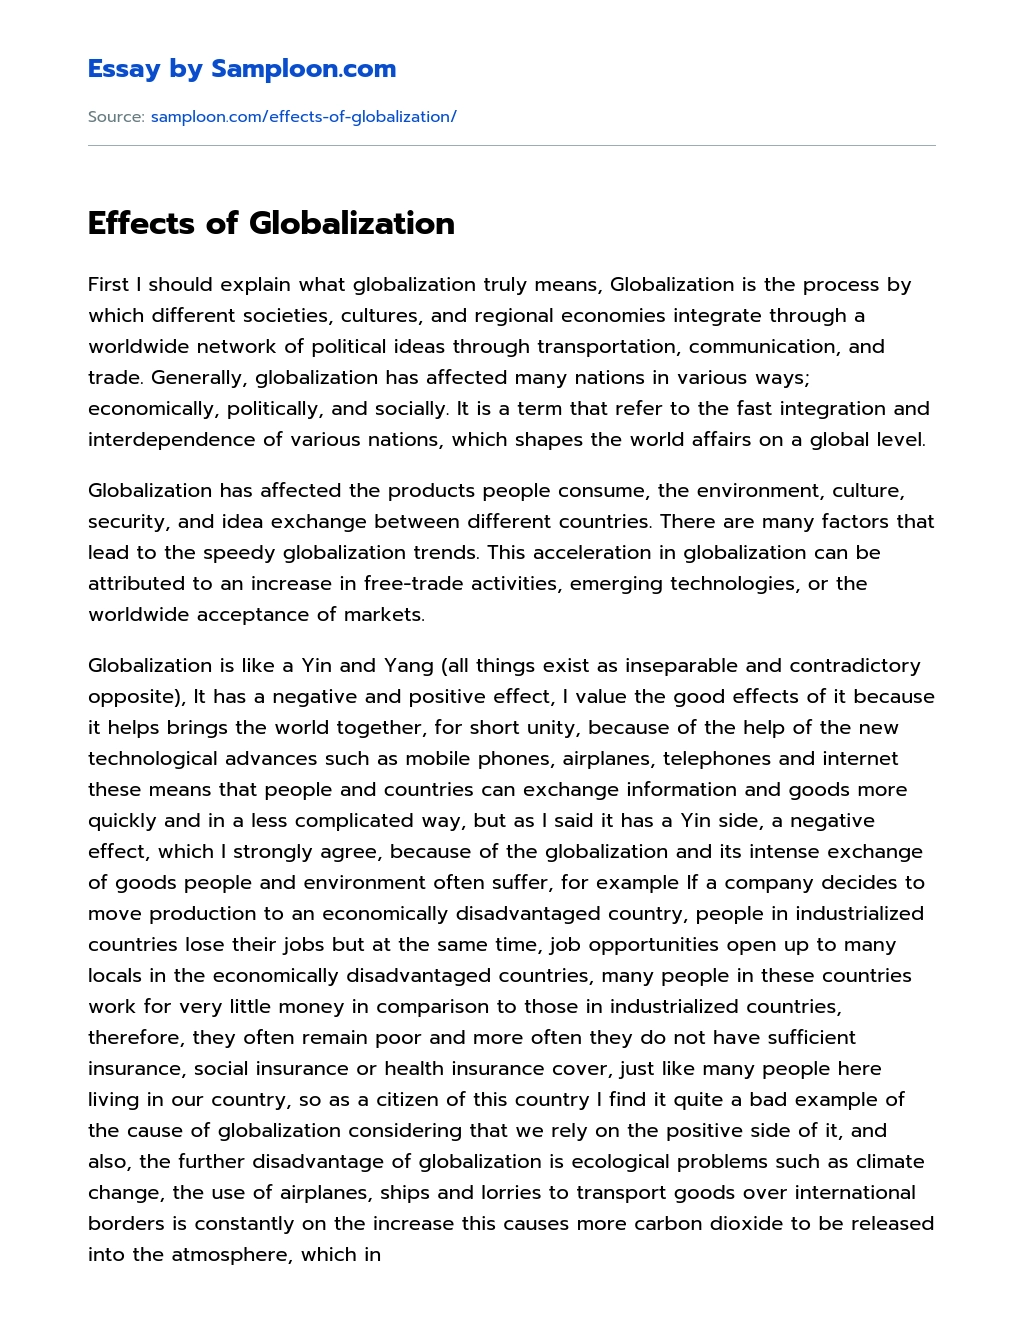 effects of globalization to law enforcement essay